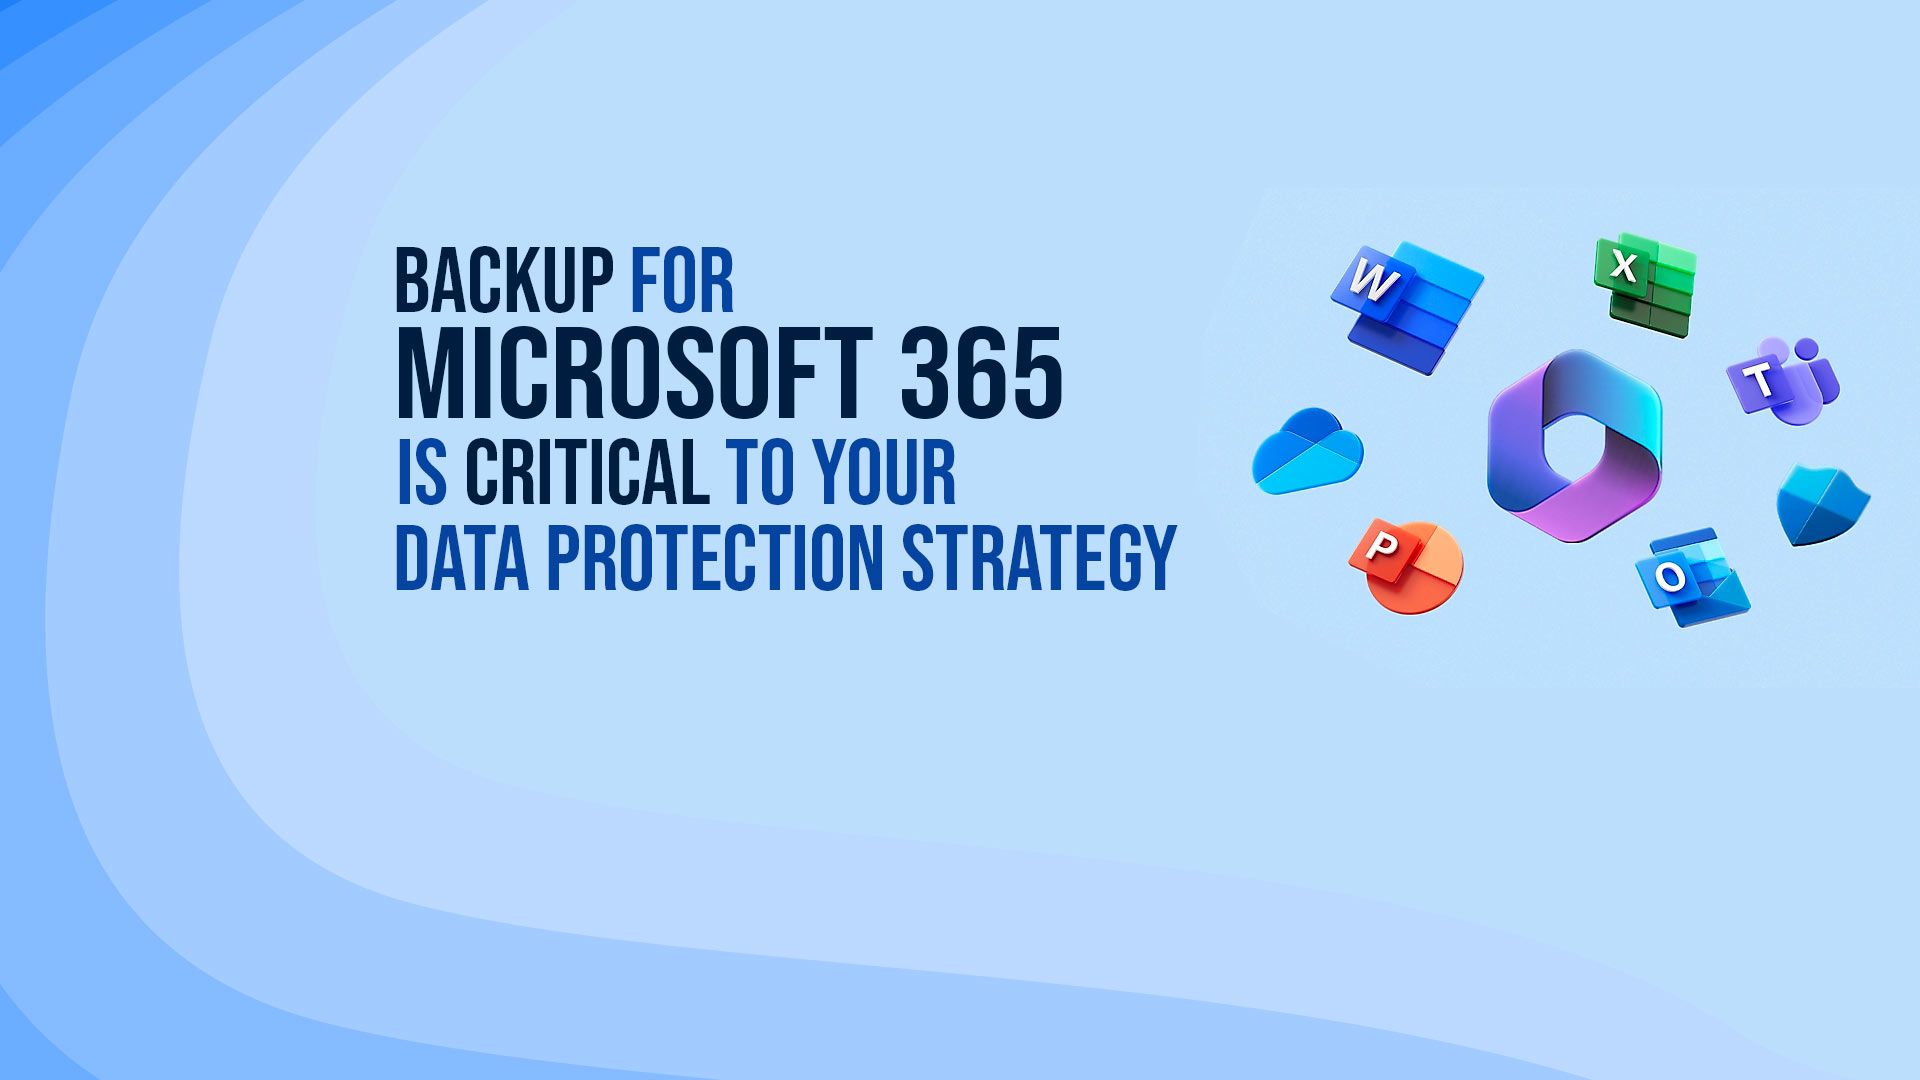 Backup for Microsoft 365 is critical to your data protection strategy